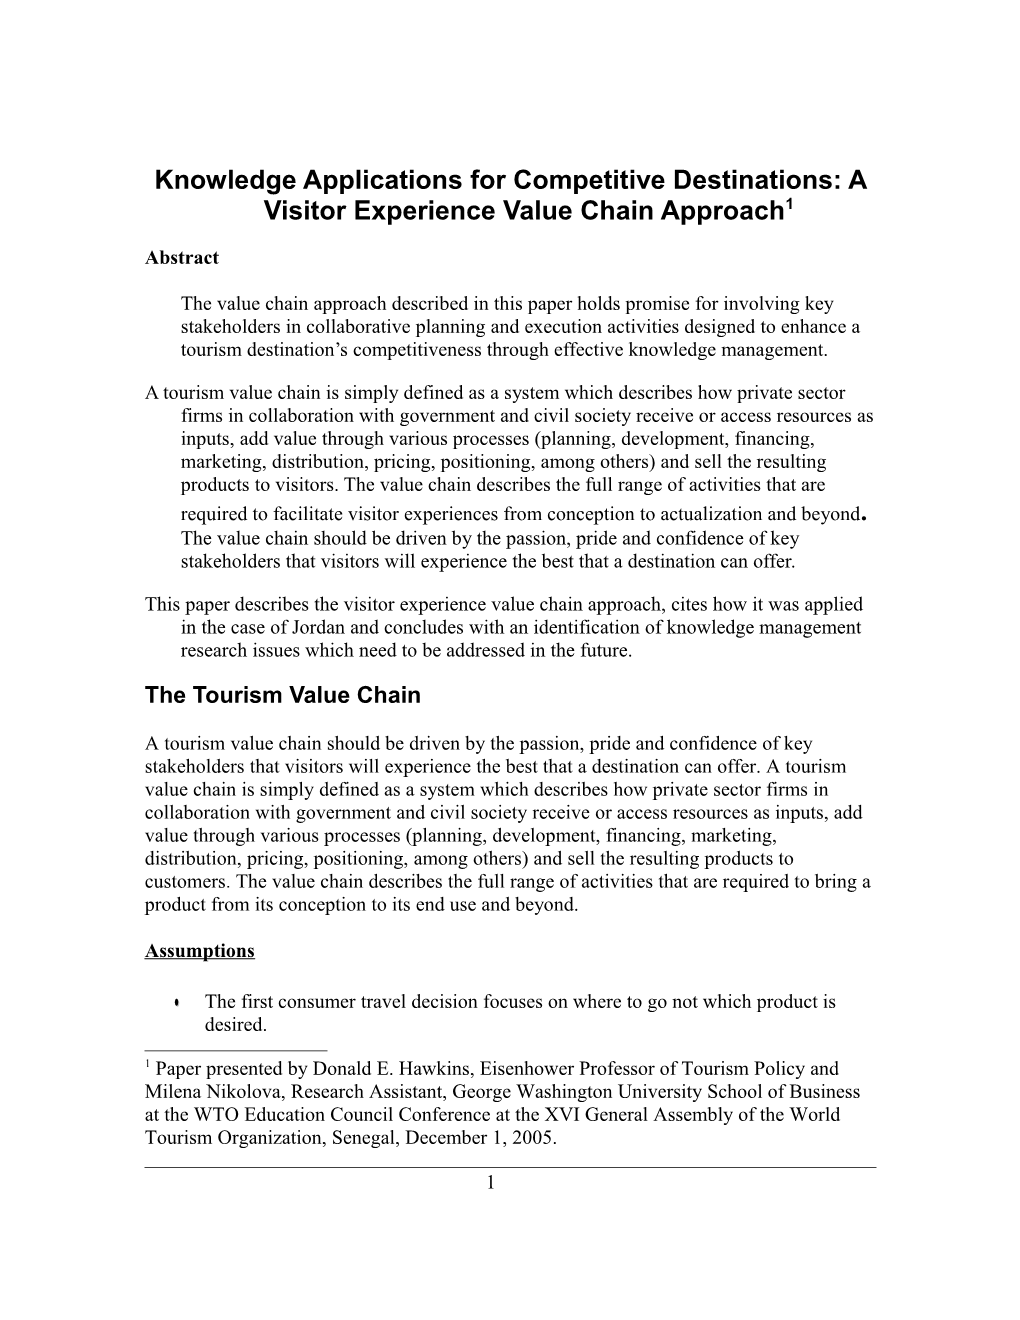 Knowledge Applications for Competitive Destinations: a Visitor Experience Value Chain Approach